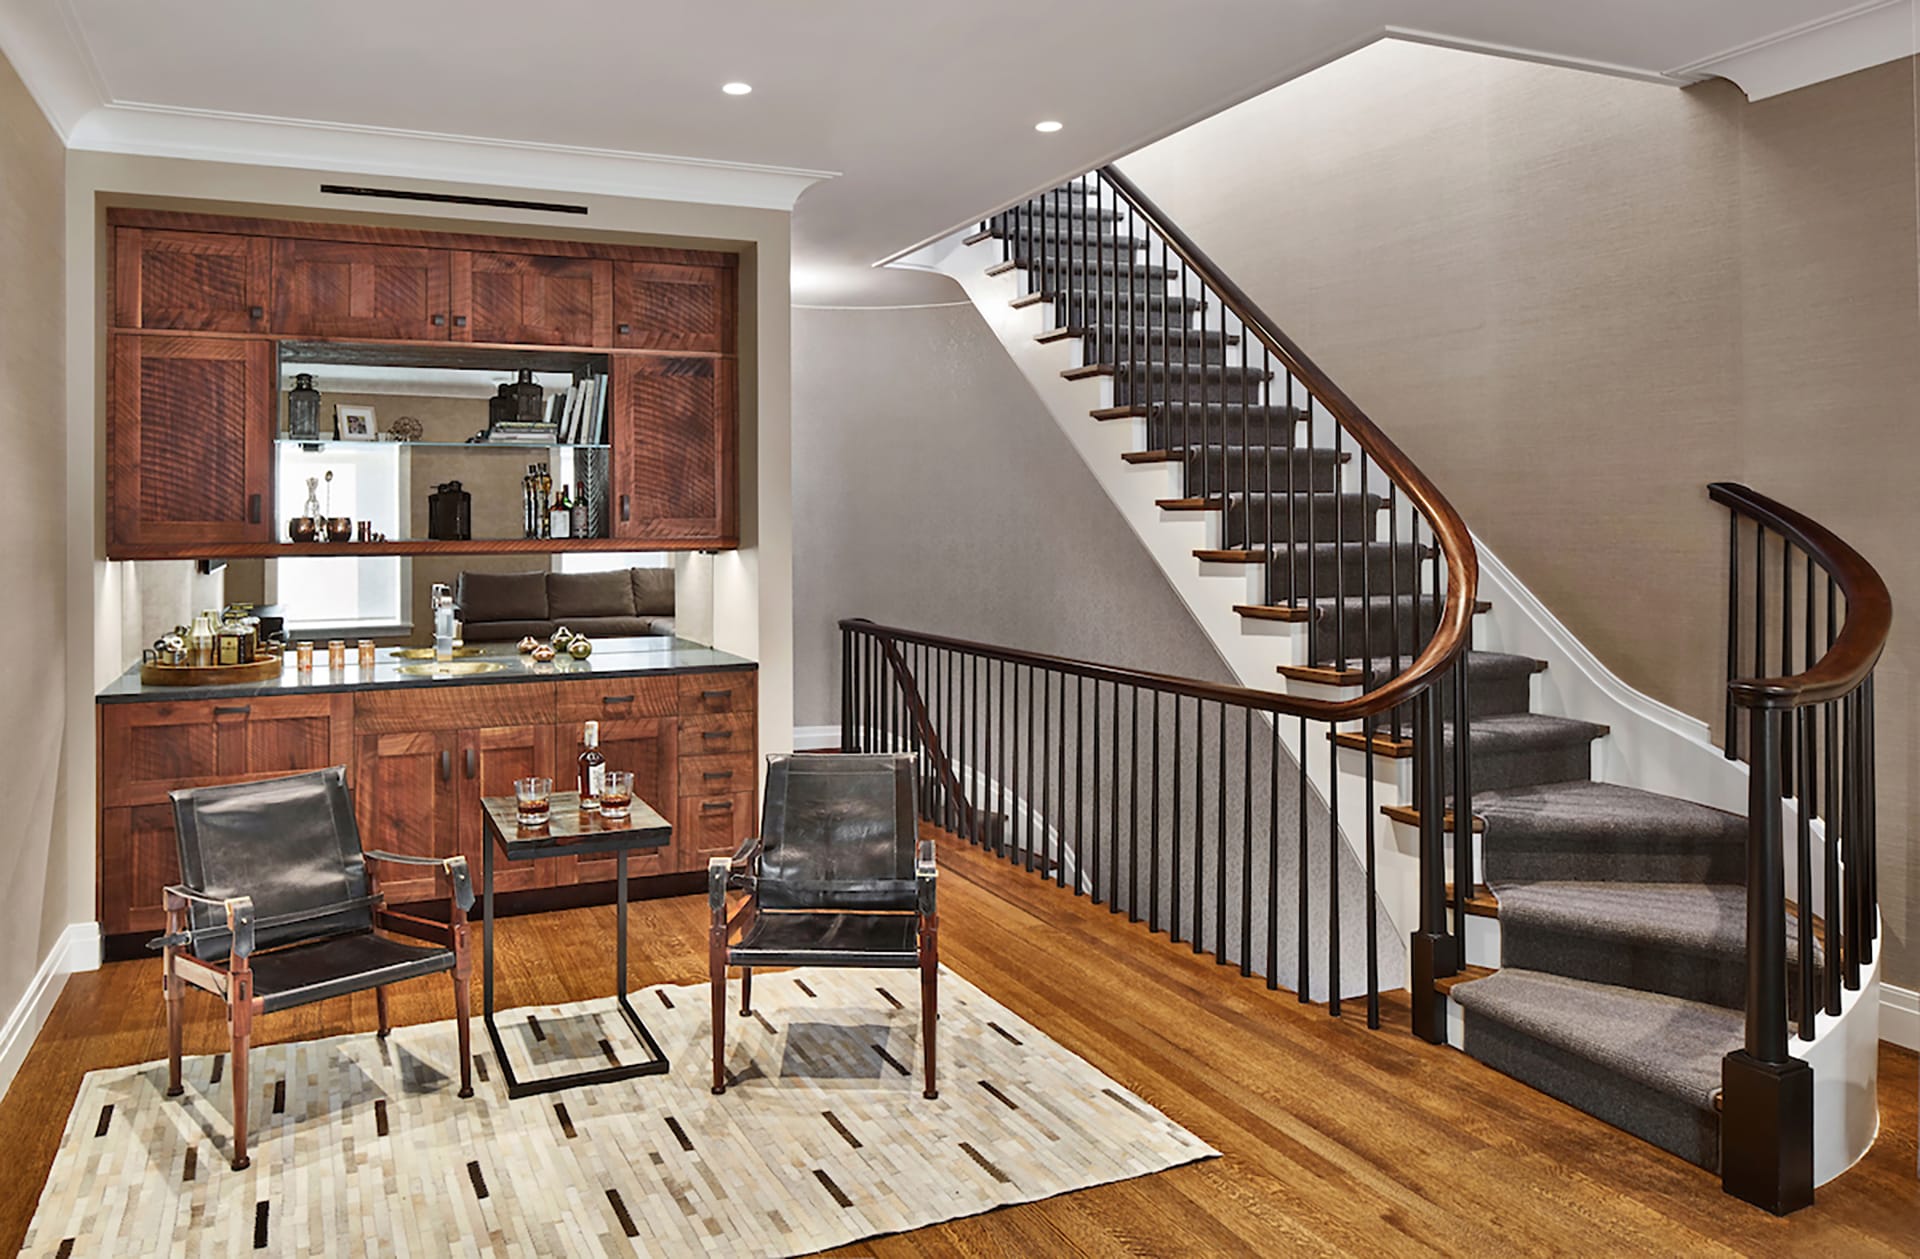 Recreation room with a dry bar next to an open staircase with a grey stair runner